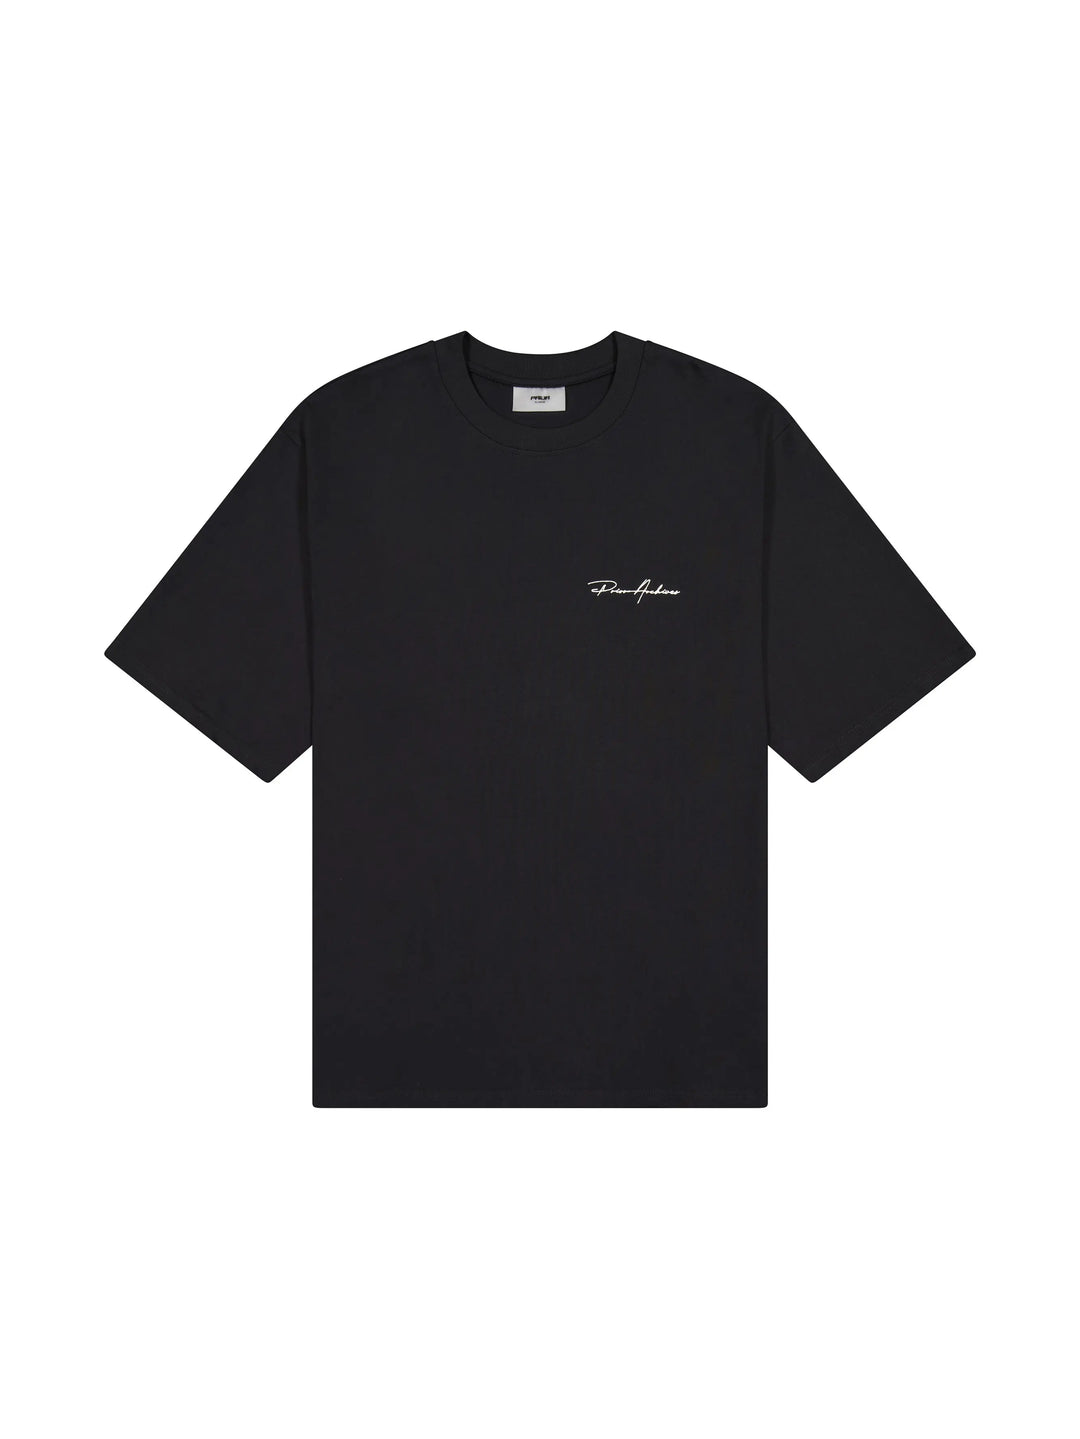 Prior Embroidery Logo Oversized T-shirt Onyx 2.0 (New Sizing) in Melbourne, Australia - Prior